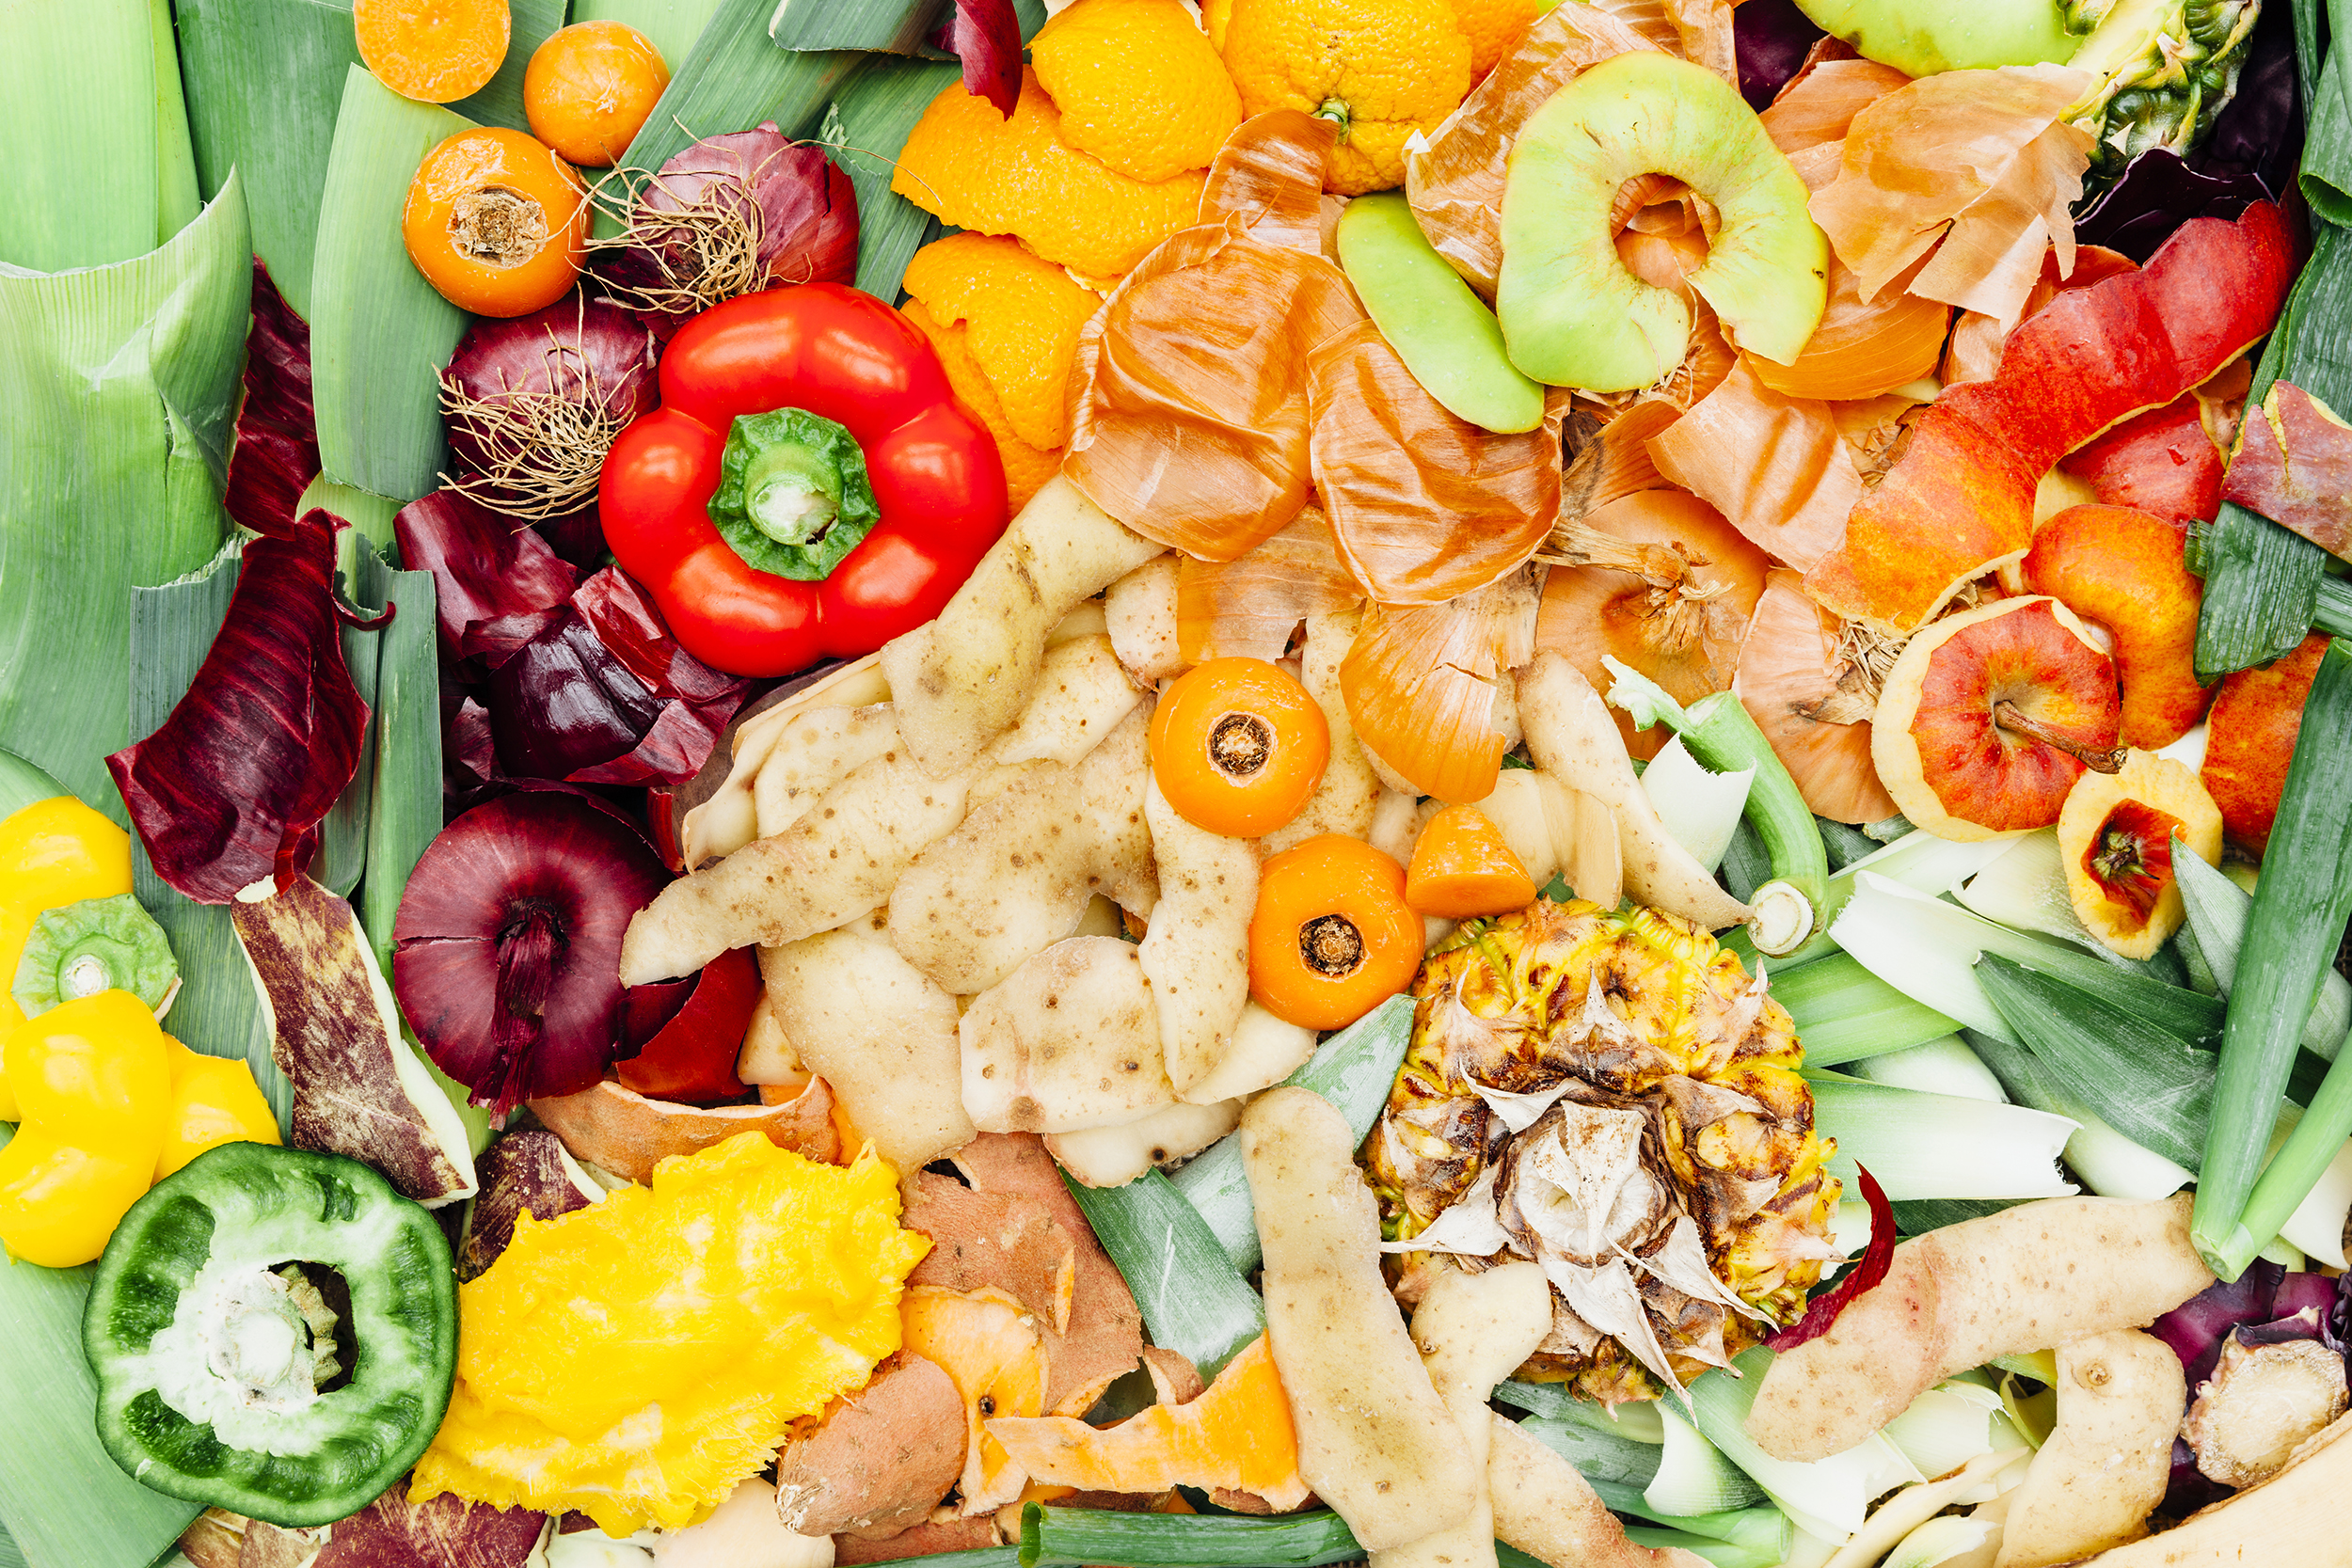 How can packaging help to reduce food waste?